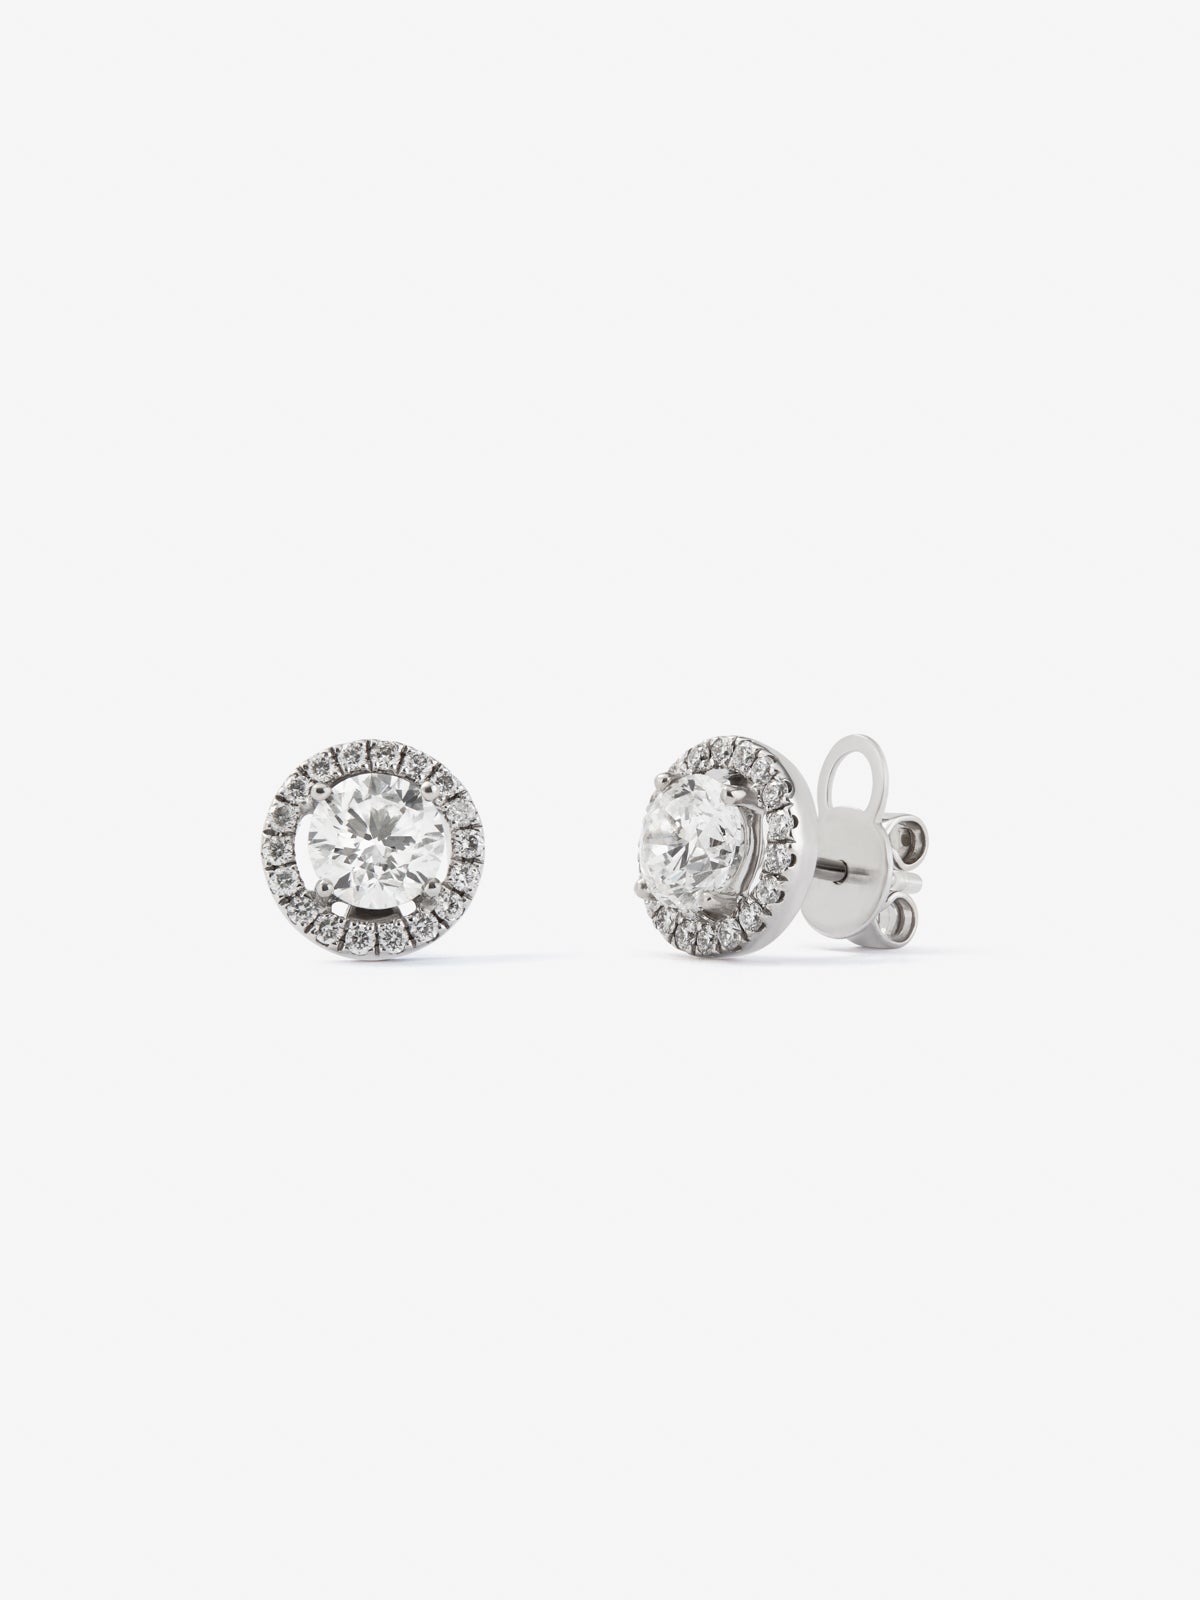 18K white gold earrings with 1.4 ct brilliant cut diamonds